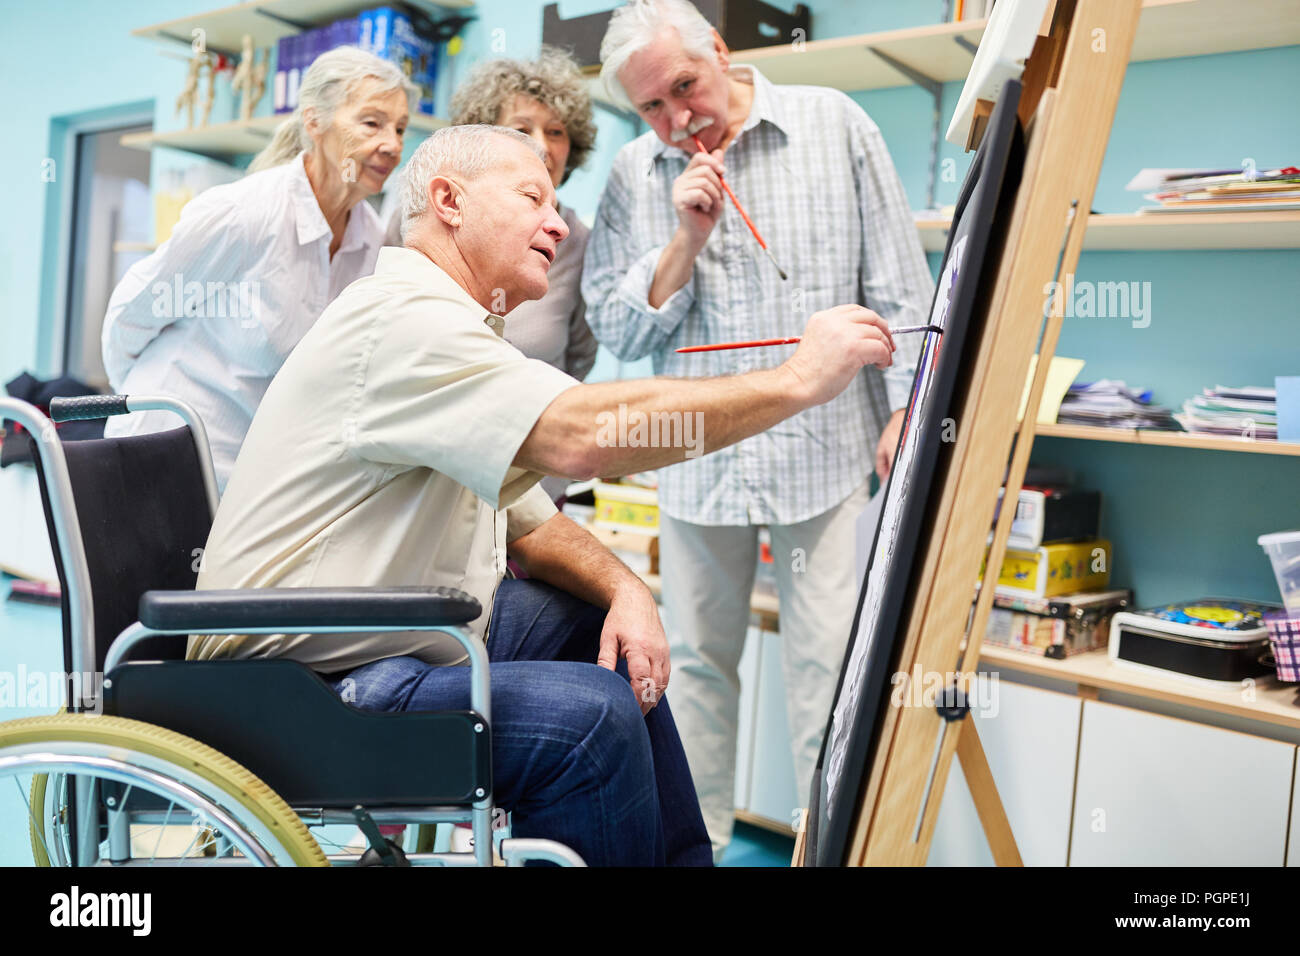 Seniors with dementia together in a creative painting class at the retirement home Stock Photo